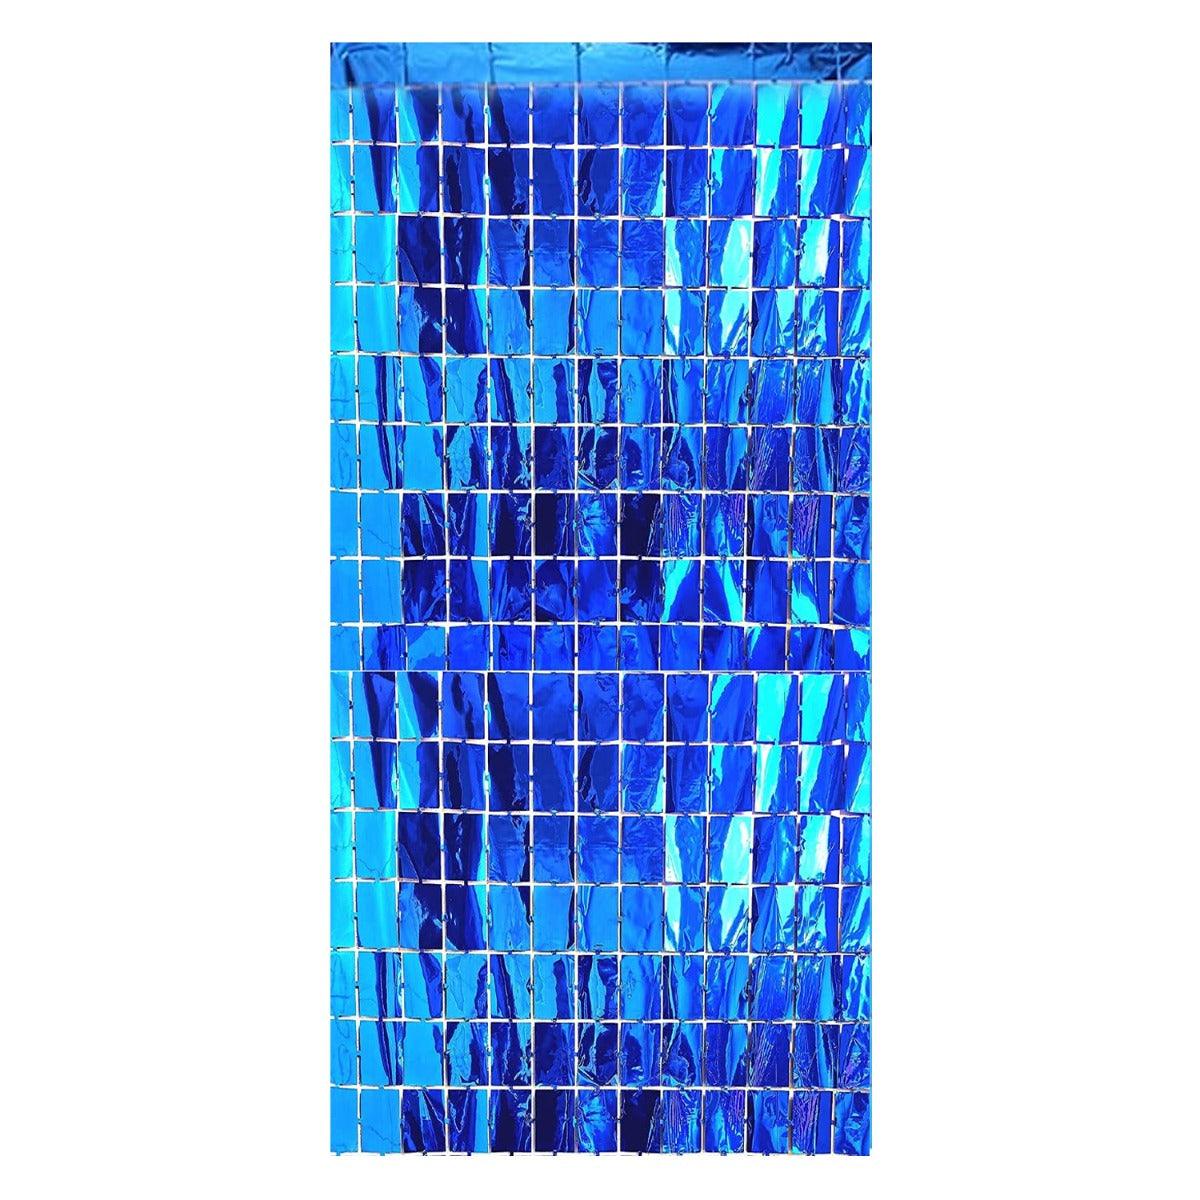 PartyCorp Square Shaped Metallic Blue Foil Curtain, 1 Pack